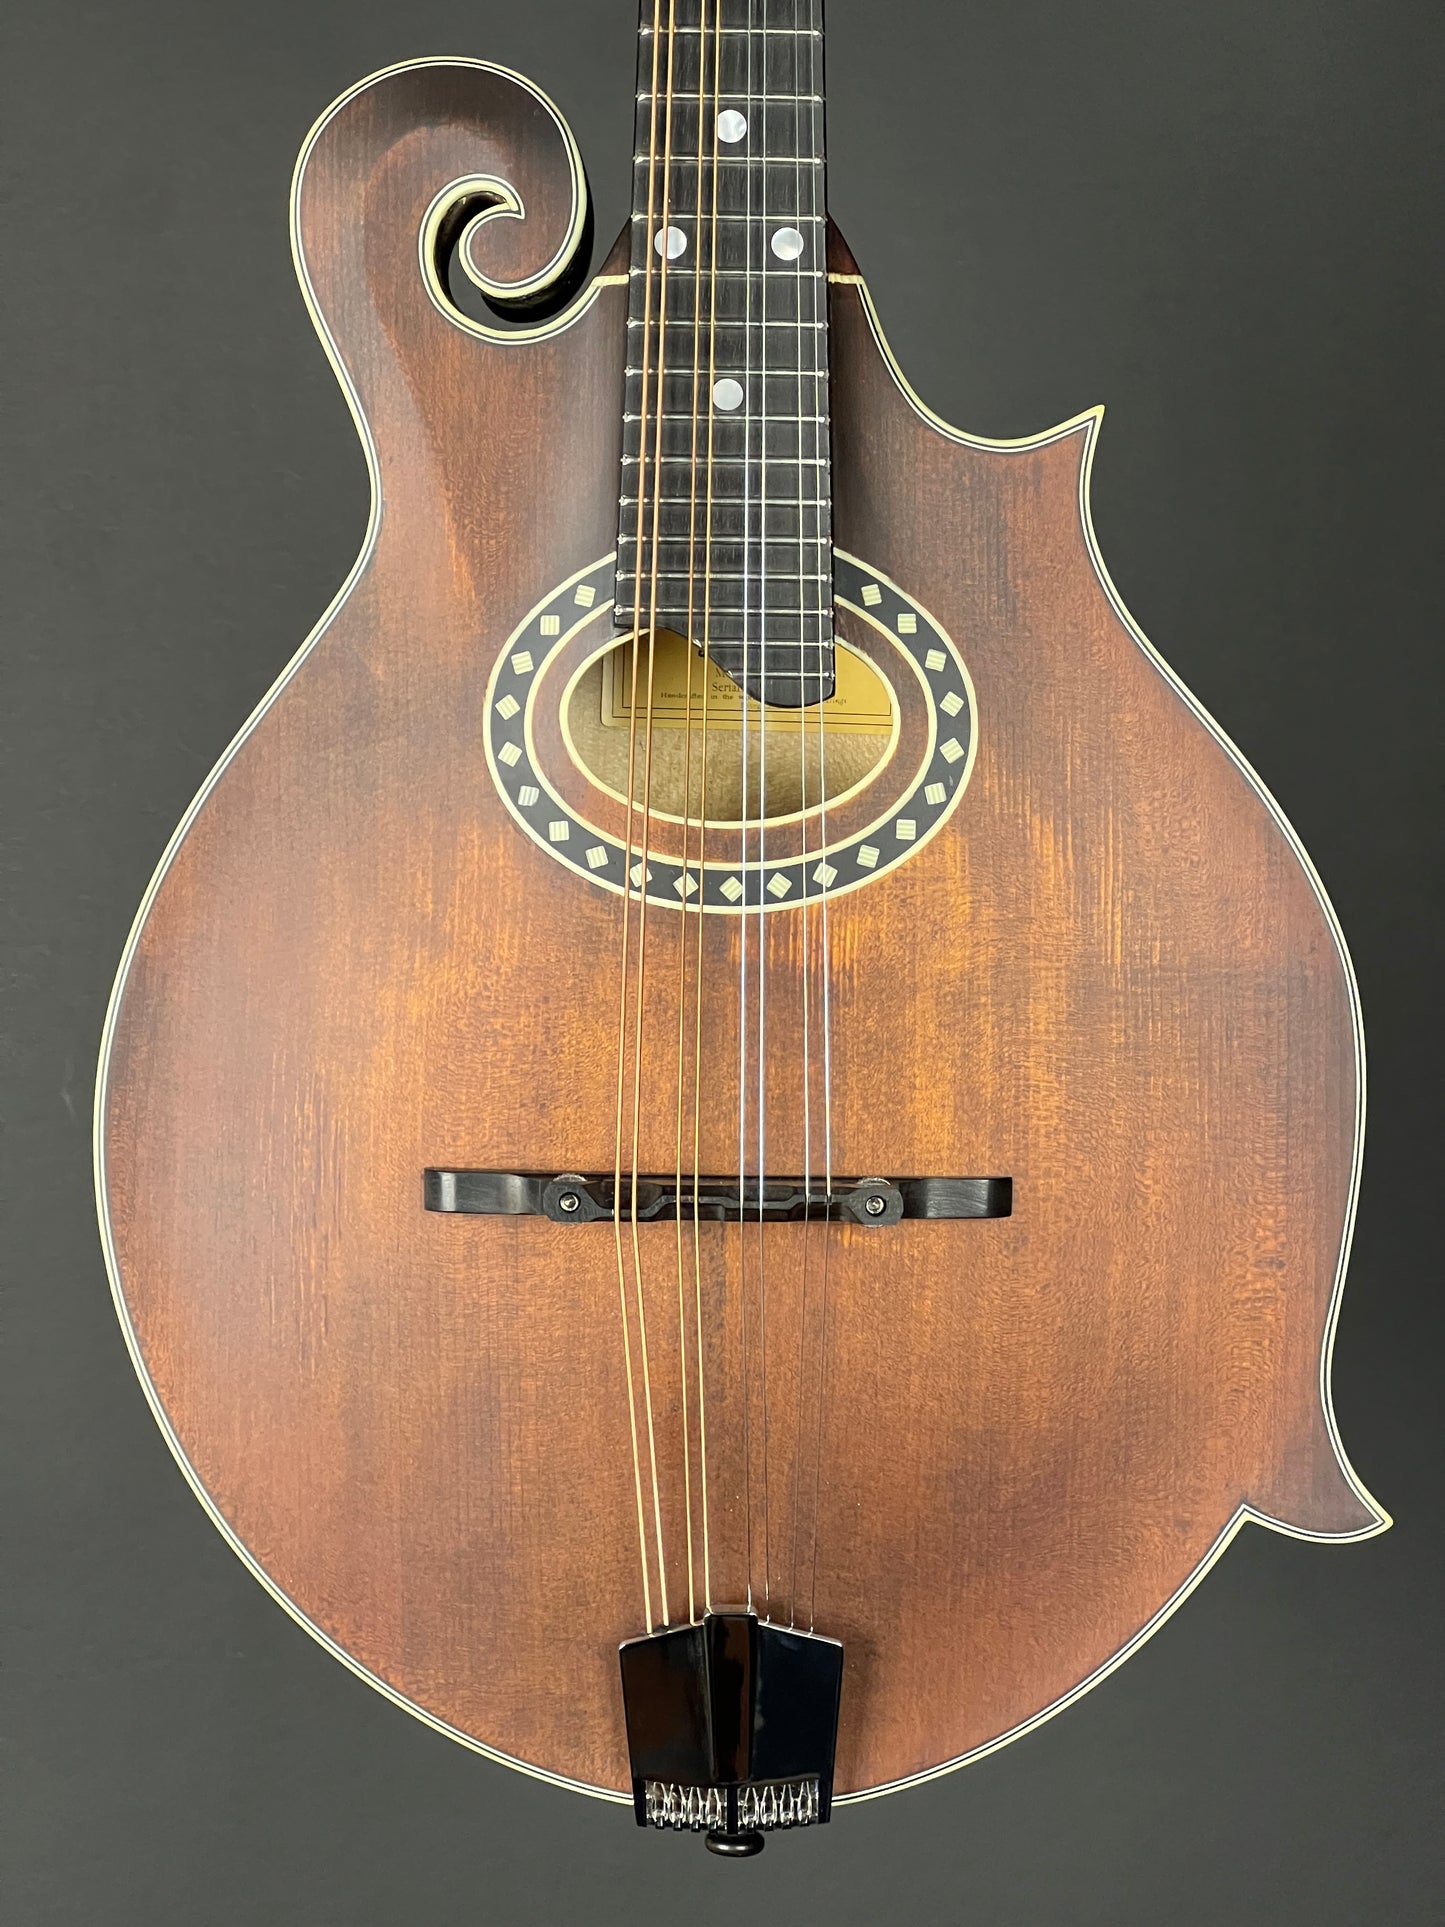 SOLD - Eastman MD314 Oval Hole Mandolin - New